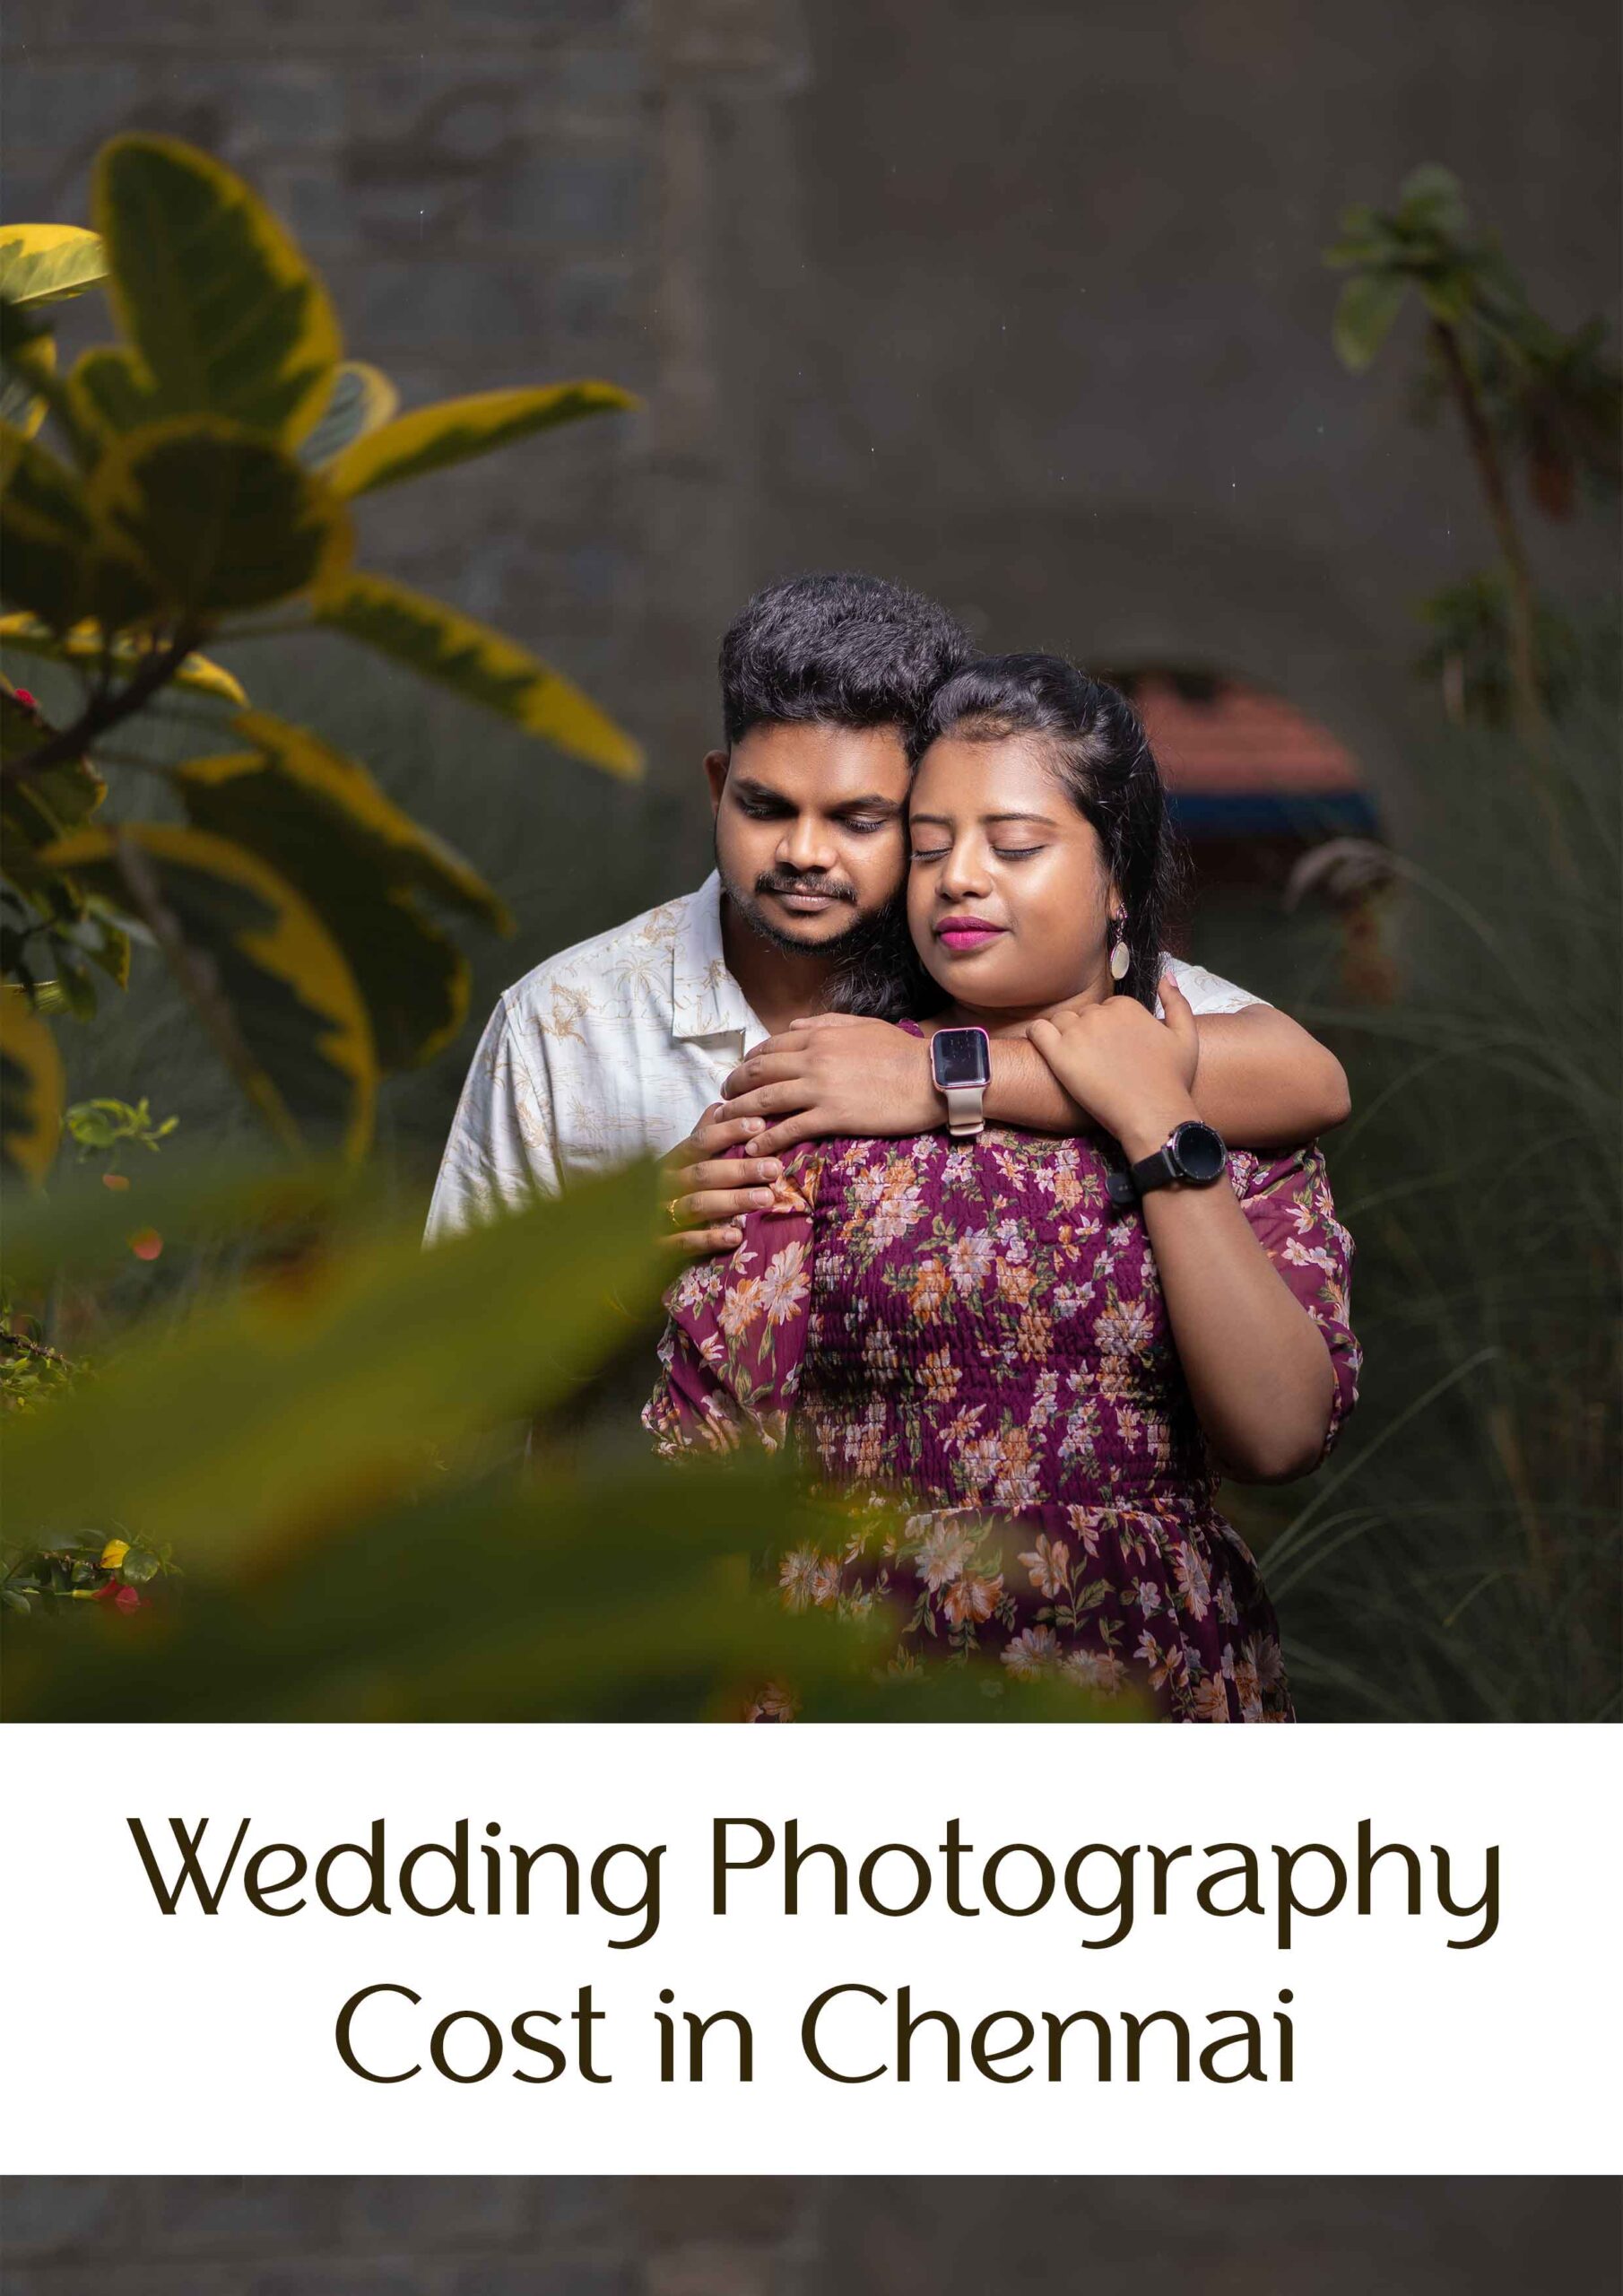 How much does a wedding photographer cost in Chennai?